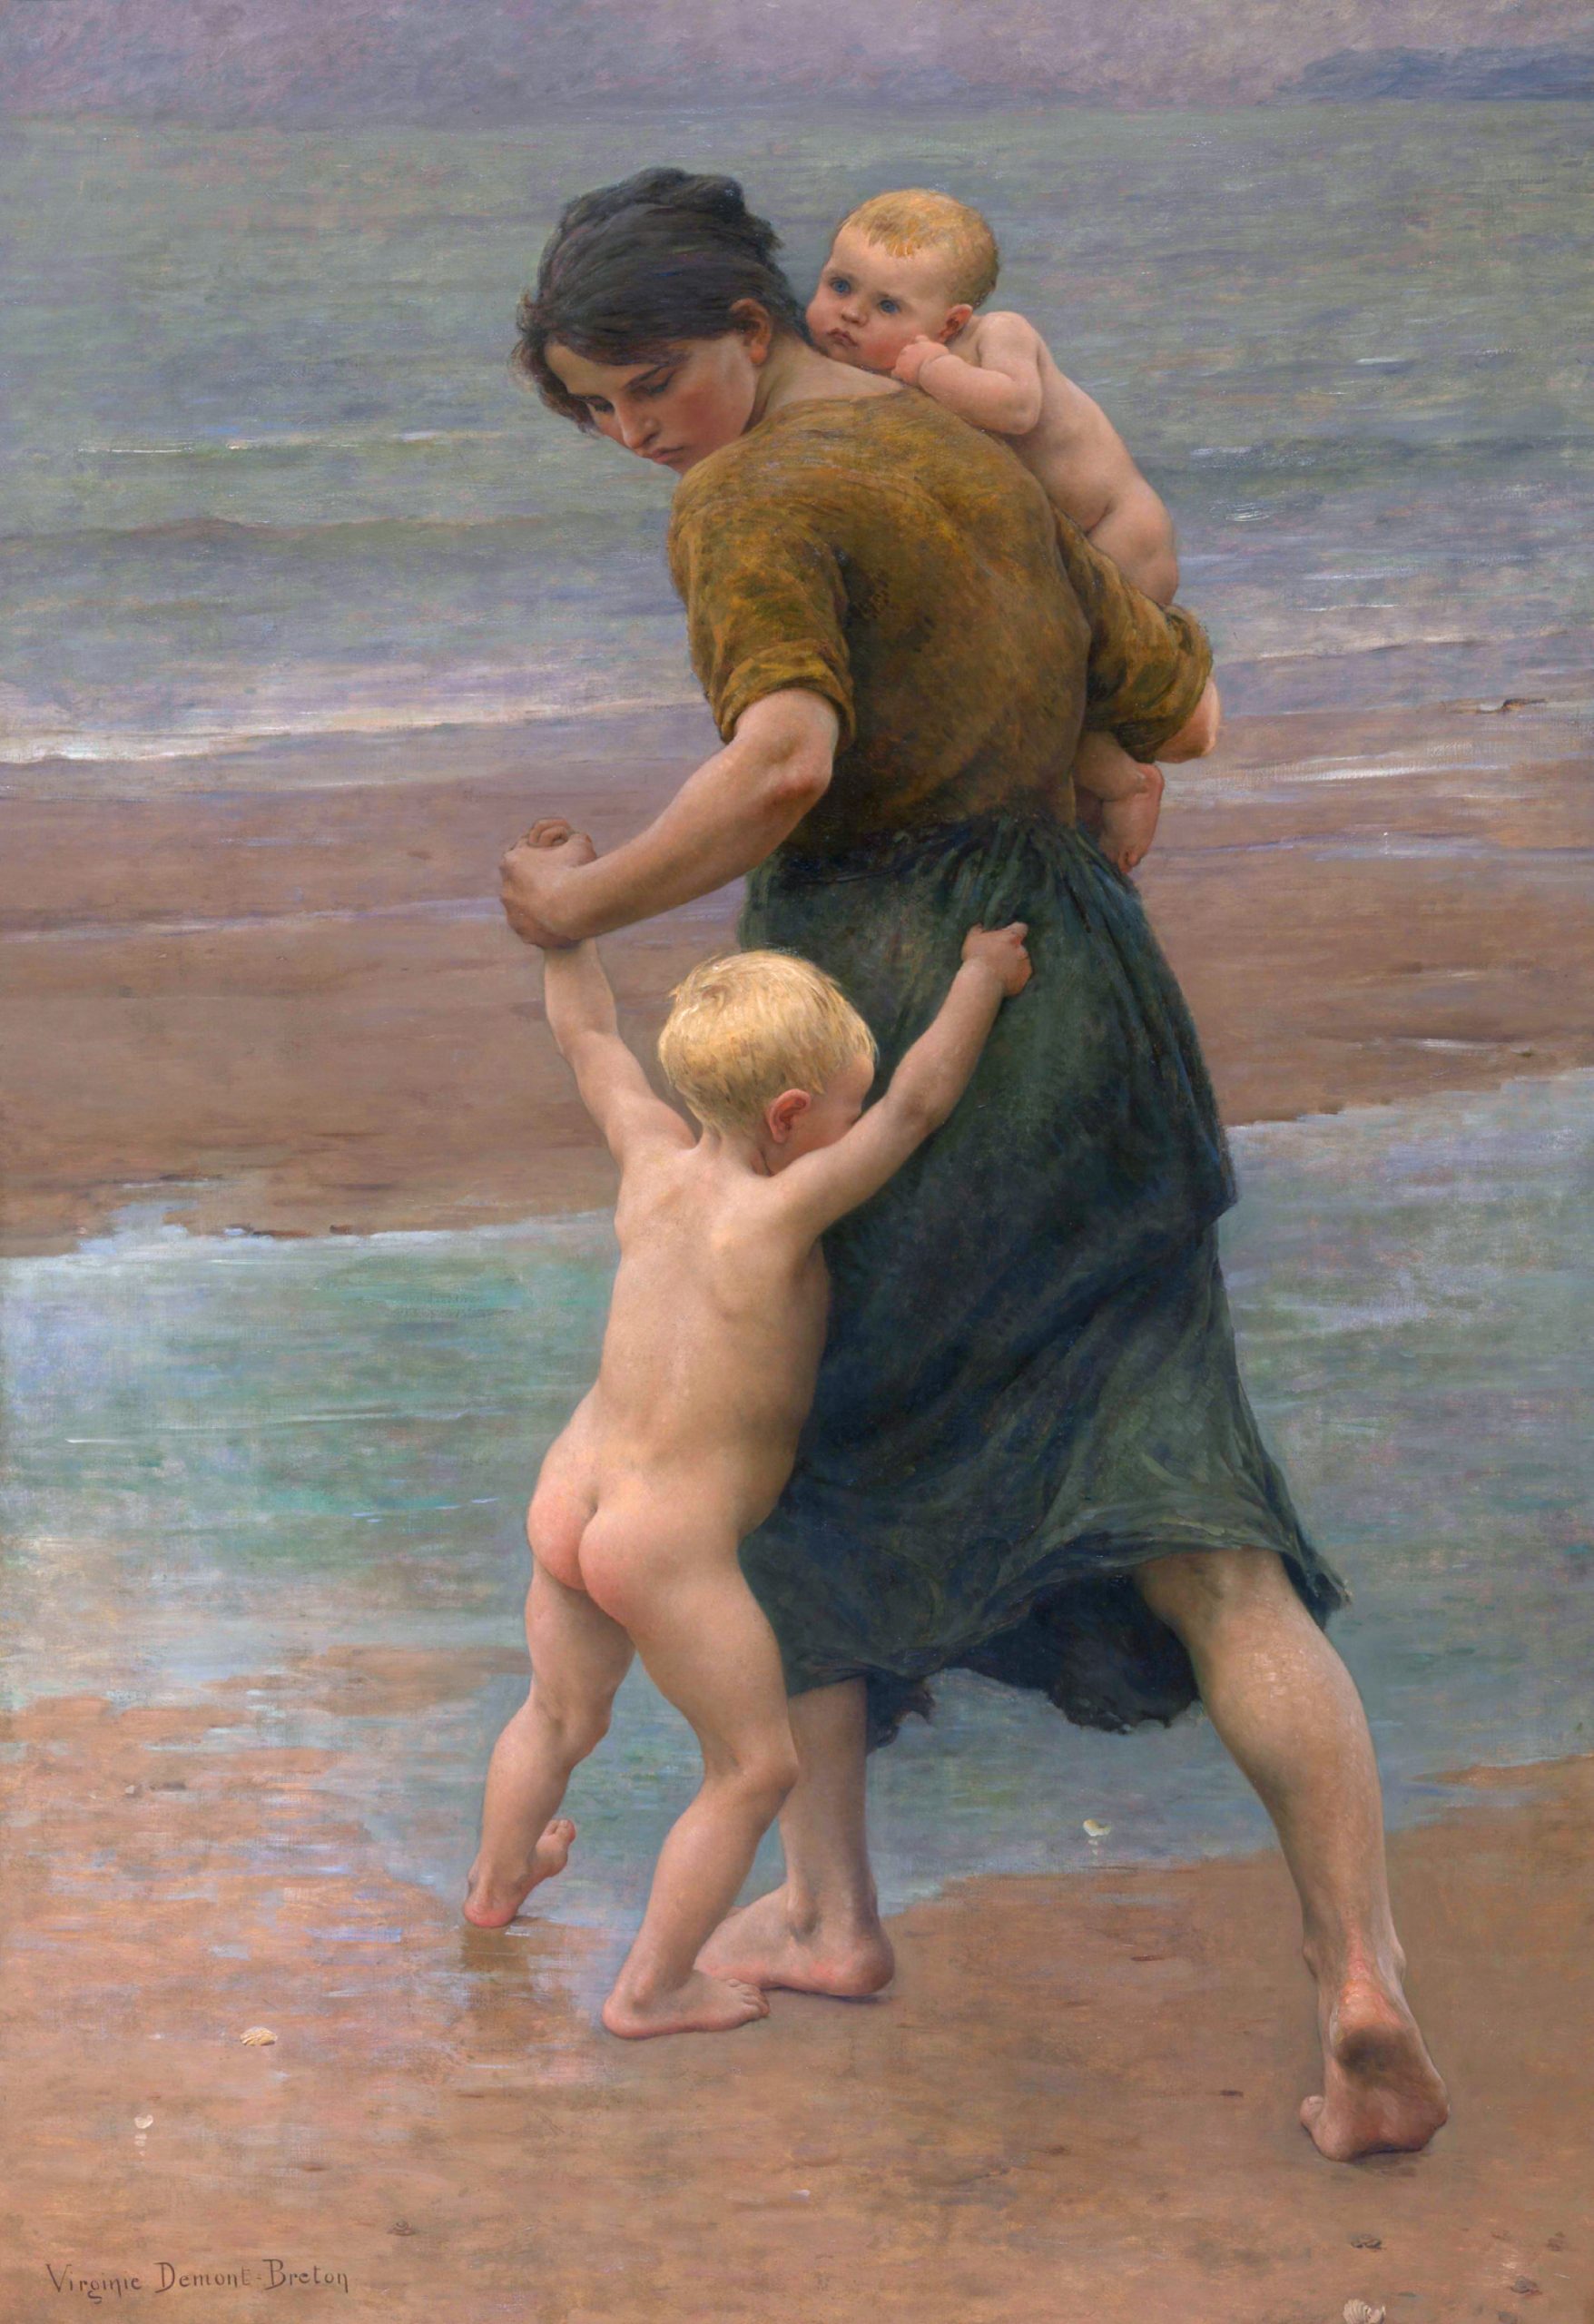 A woman carrying a baby in her arm and holding a toddler by the hand while striding across the beach